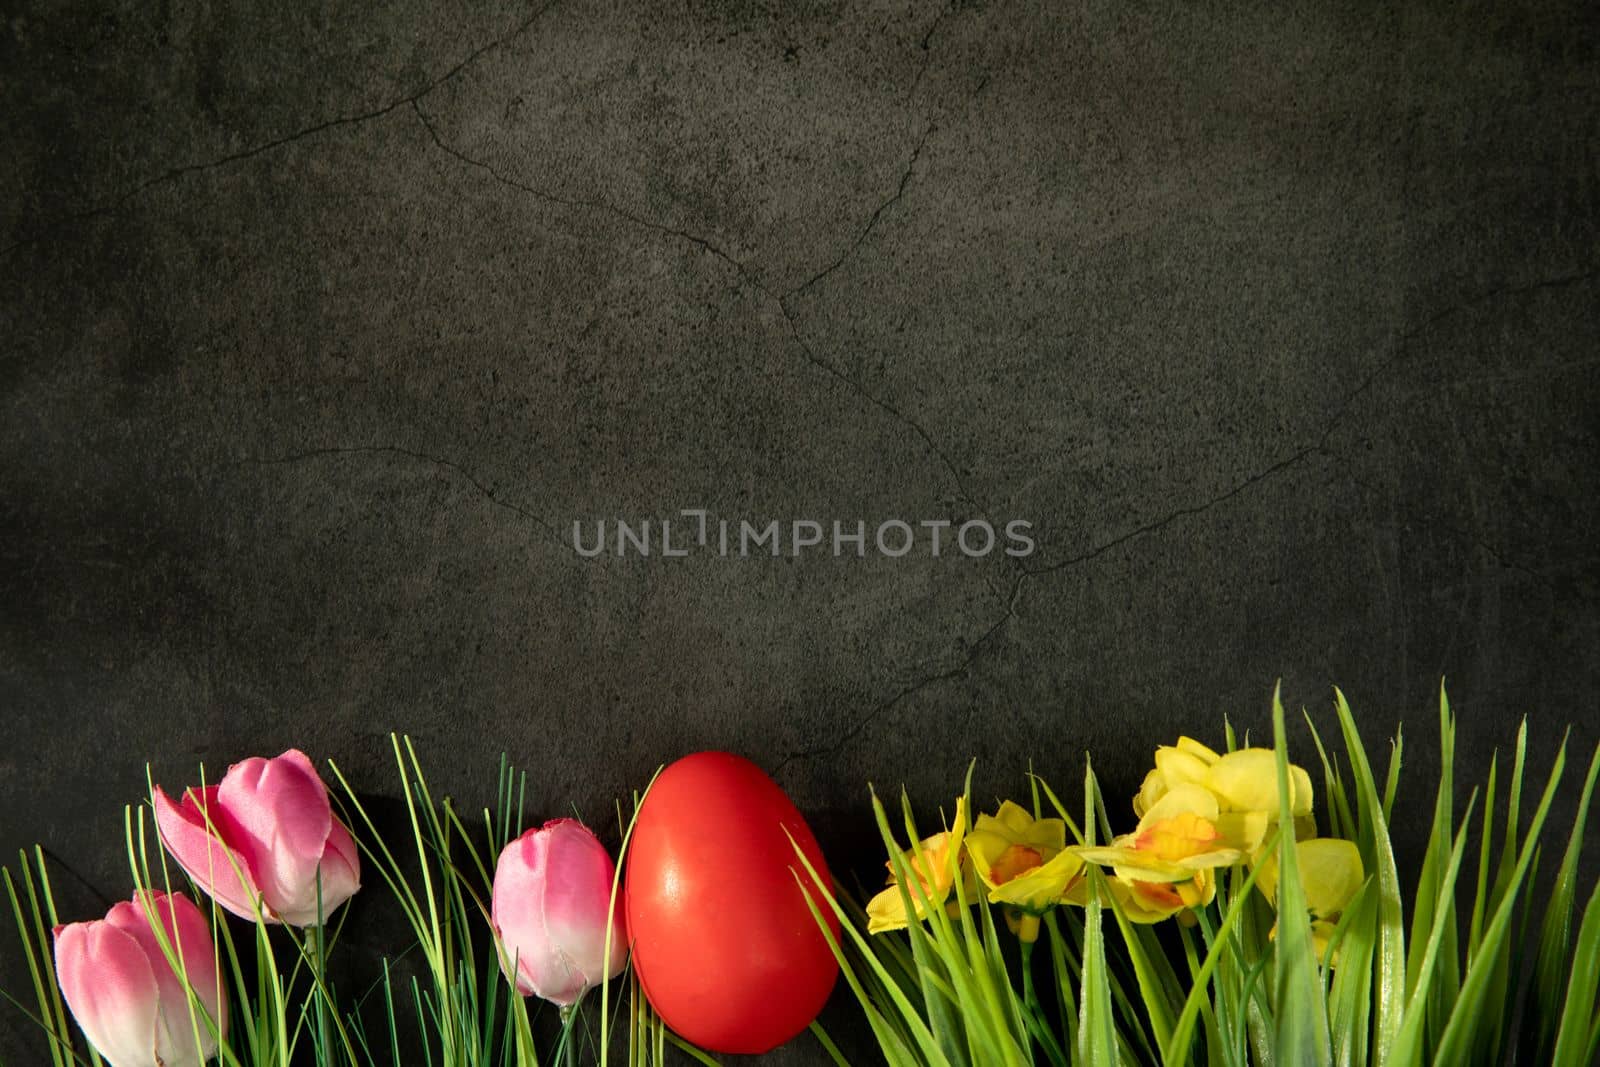 Easter eggs on fresh green grass against grey concrete background, colorful pink tulips and yellow daisies. Happy Easter holiday concept with copy space top view design egg hunting